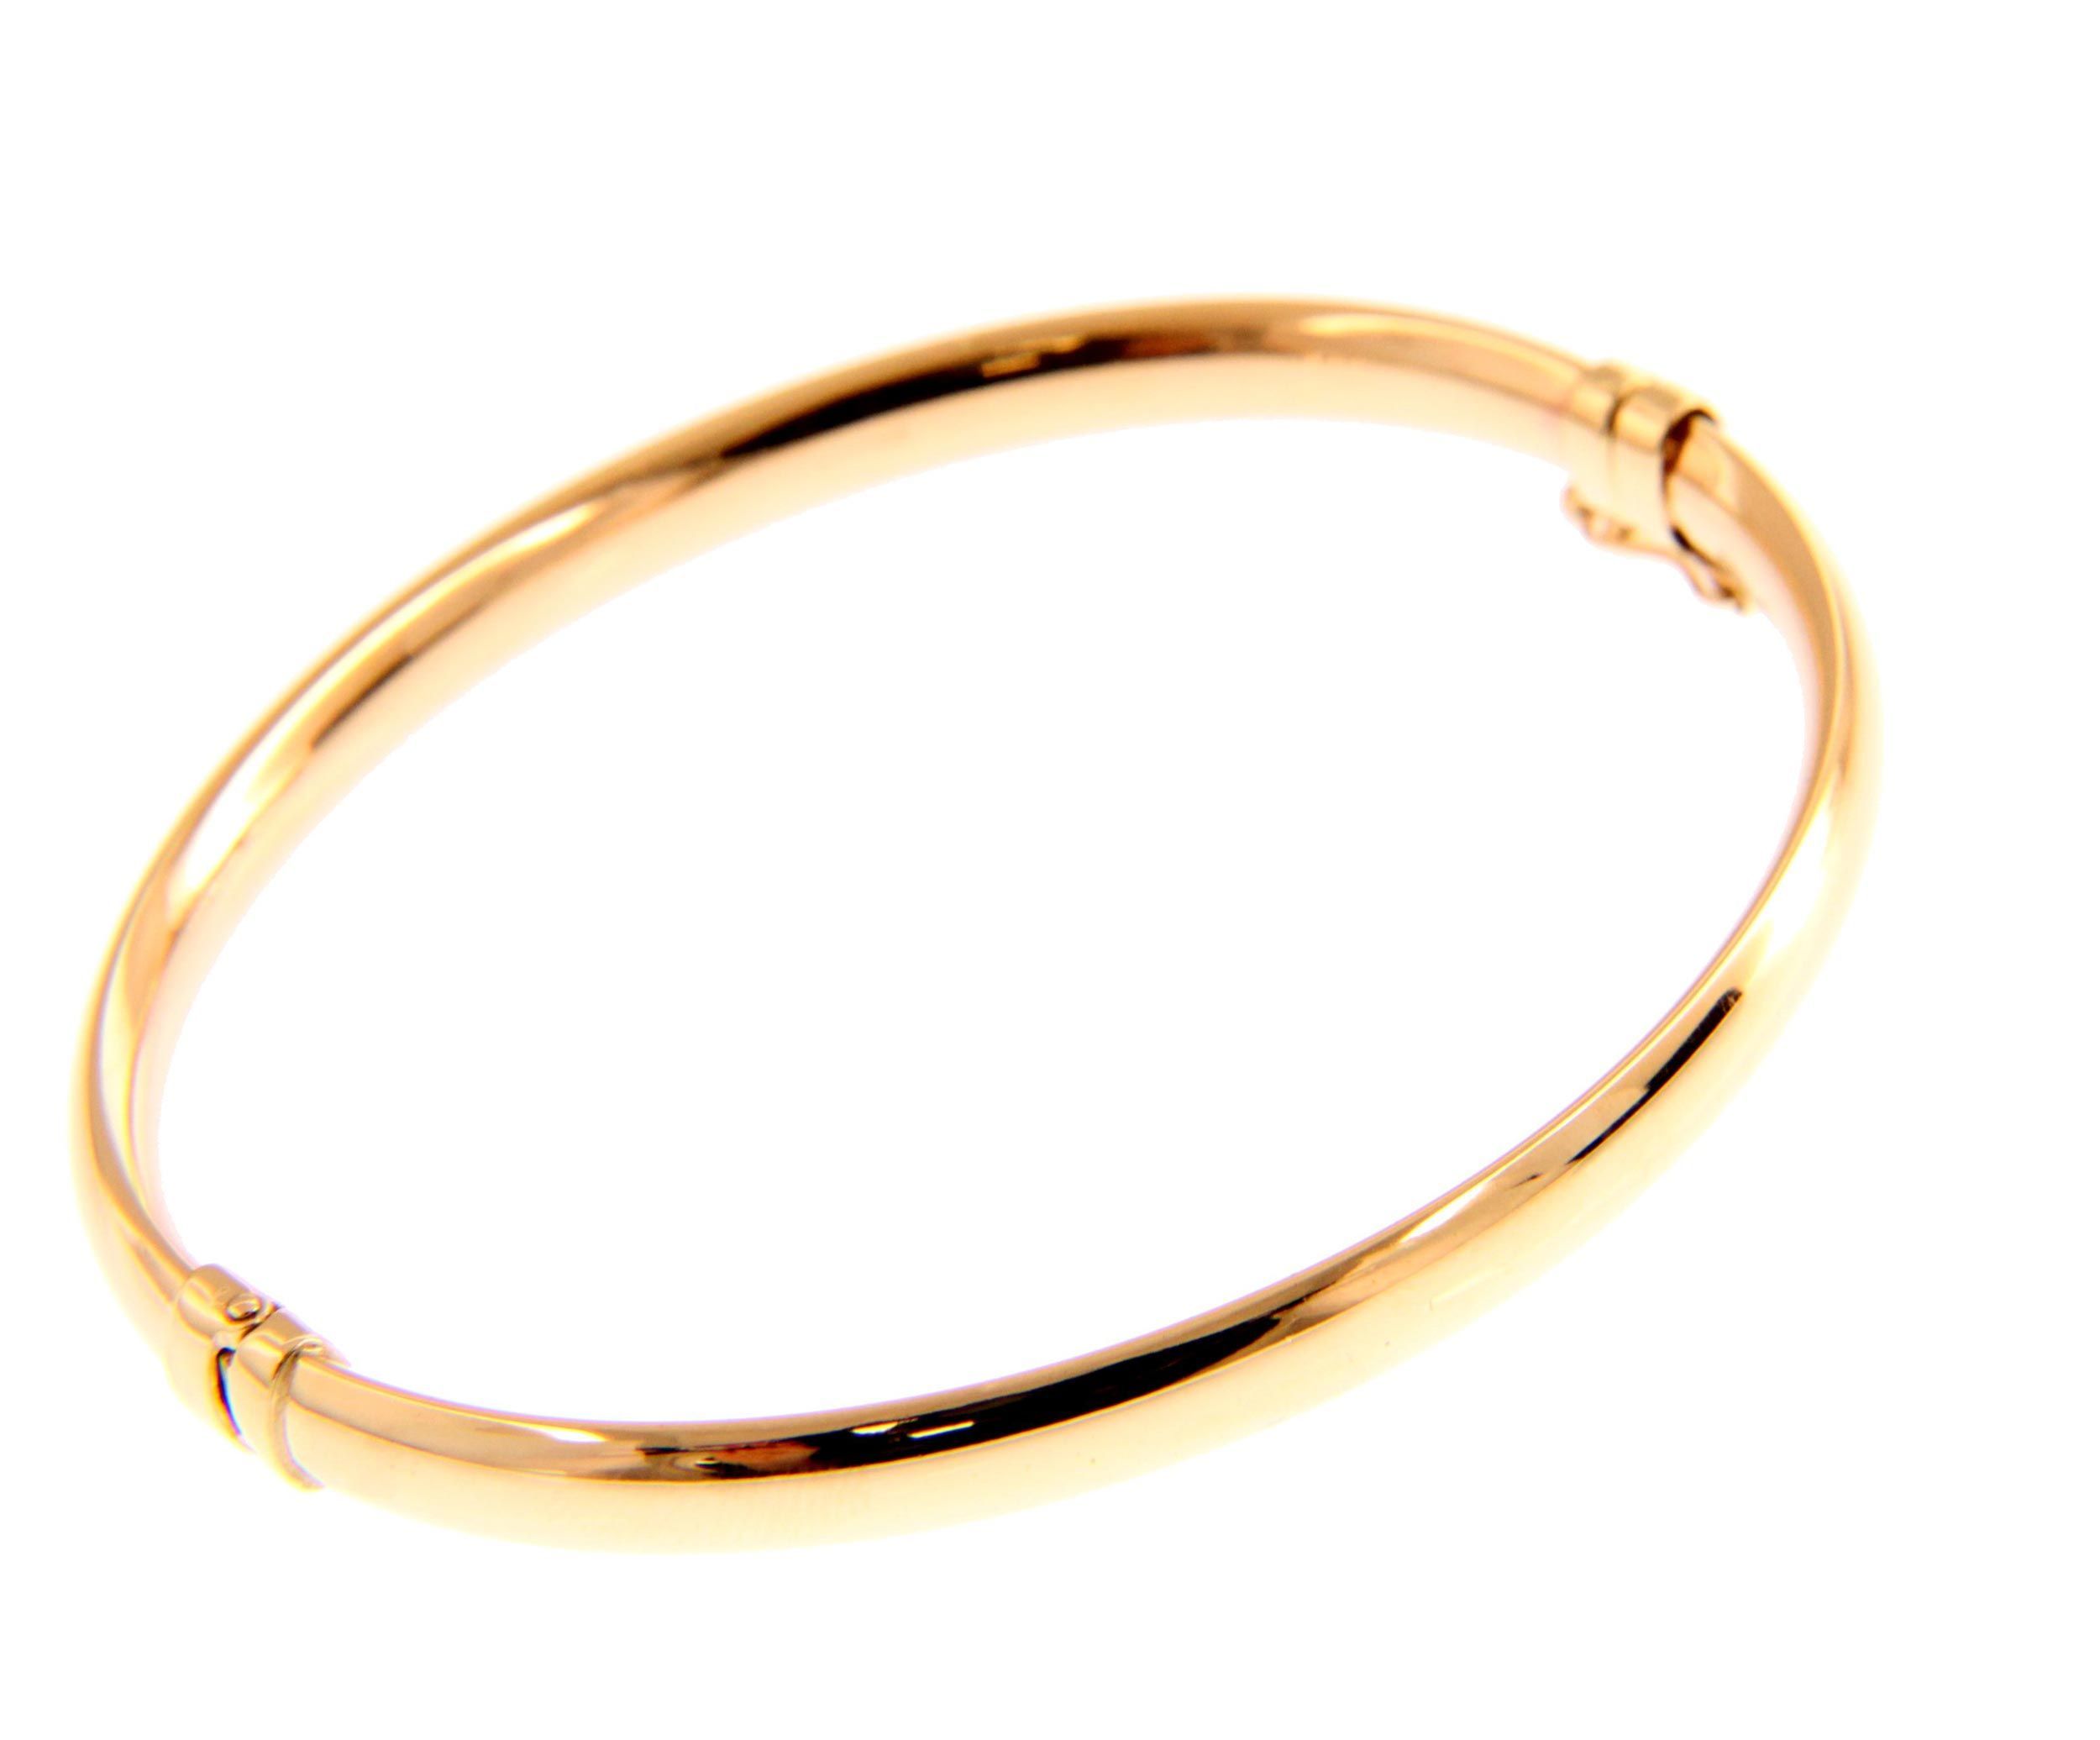 Golden oval bracelet with clasp k14  (code S240747)